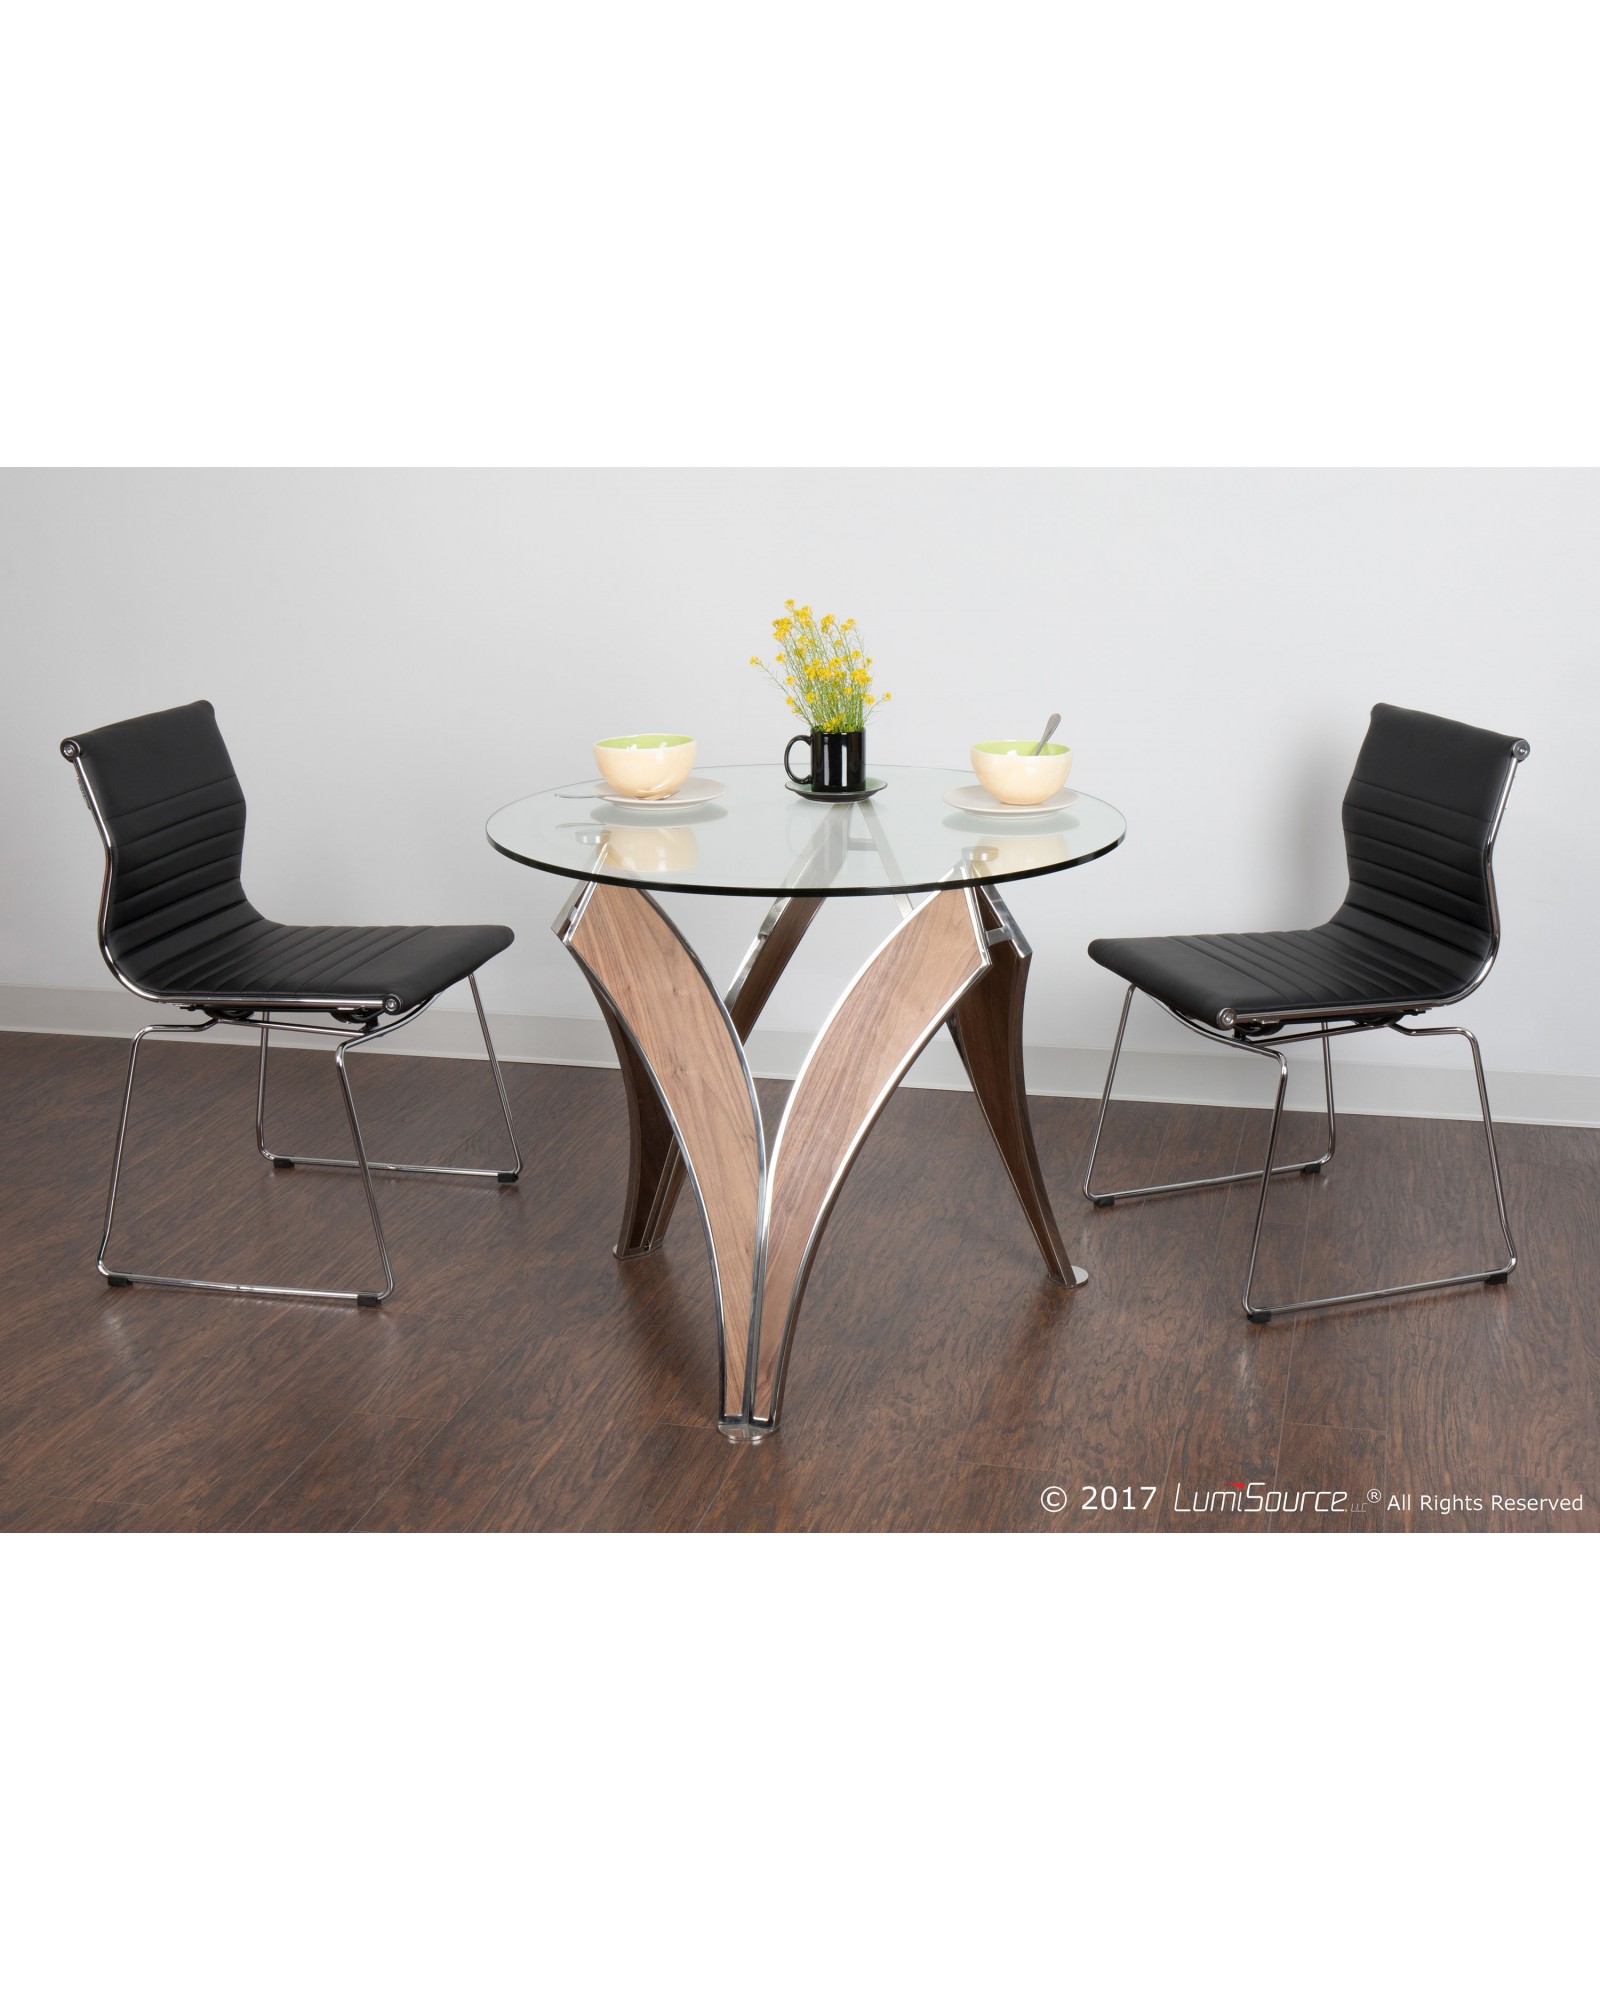 Prestige Contemporary Dining Table in Polished Stainless Steel and Walnut